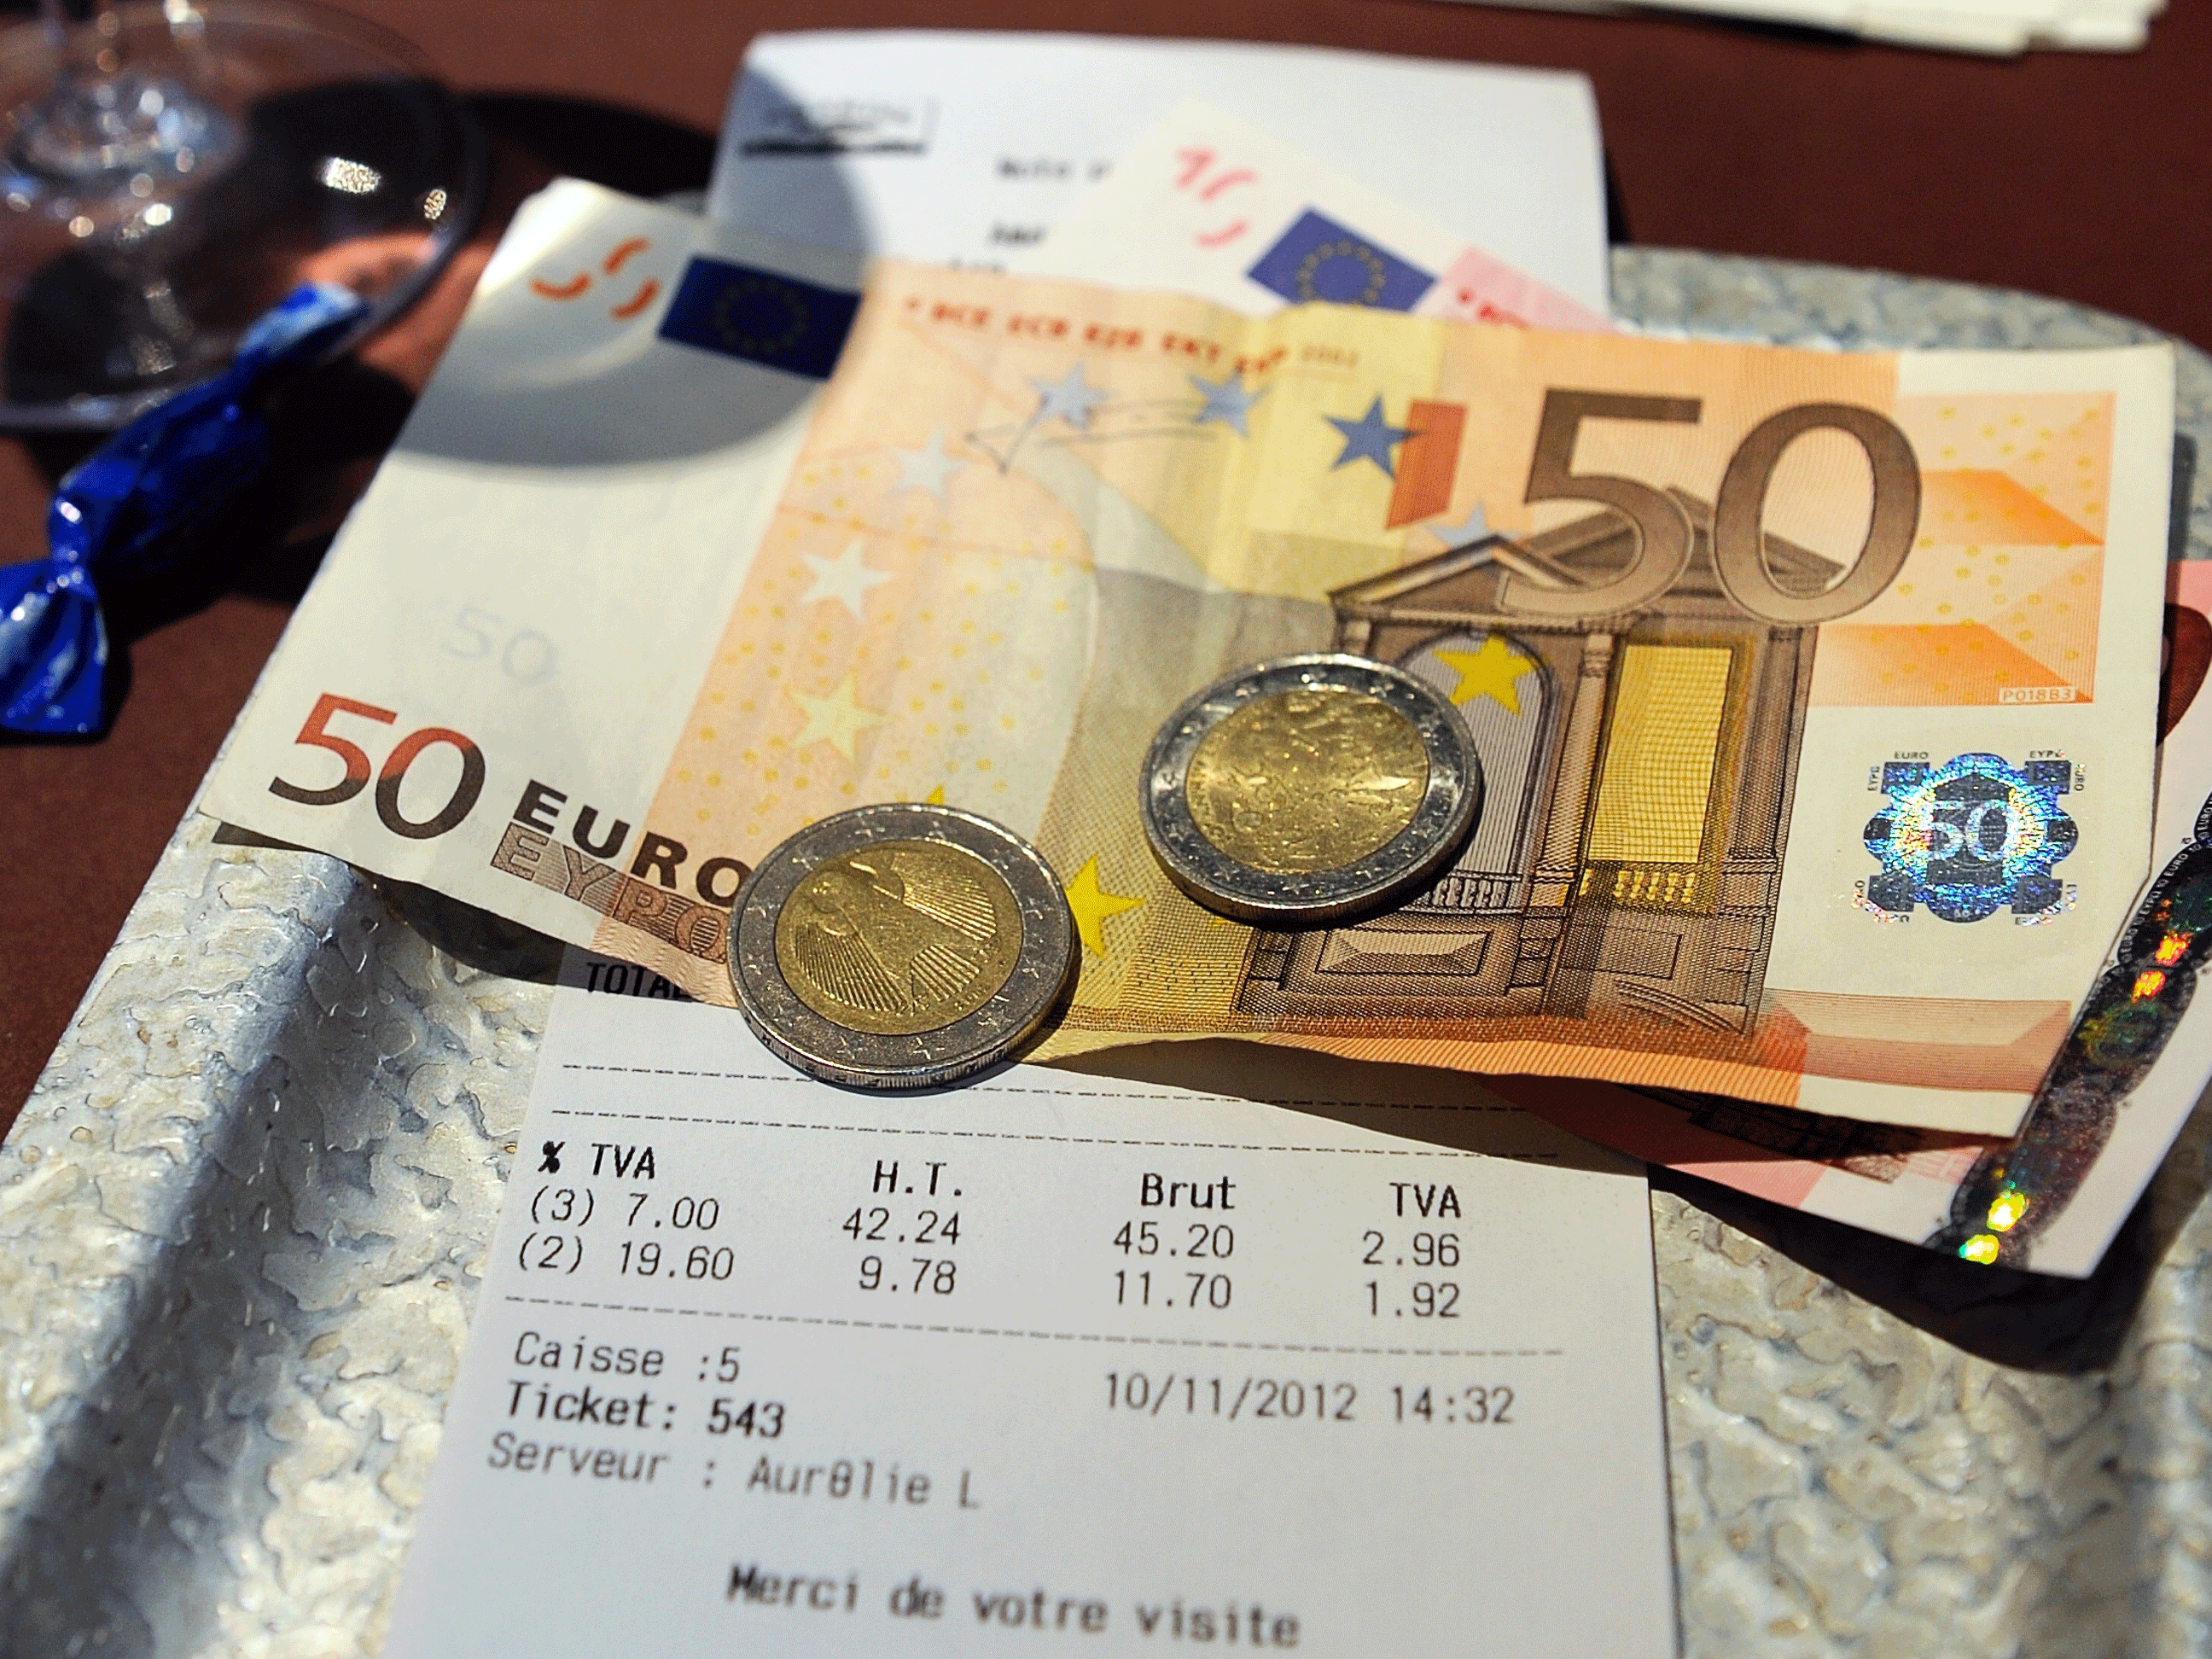 The French are the worst tippers according to a new study